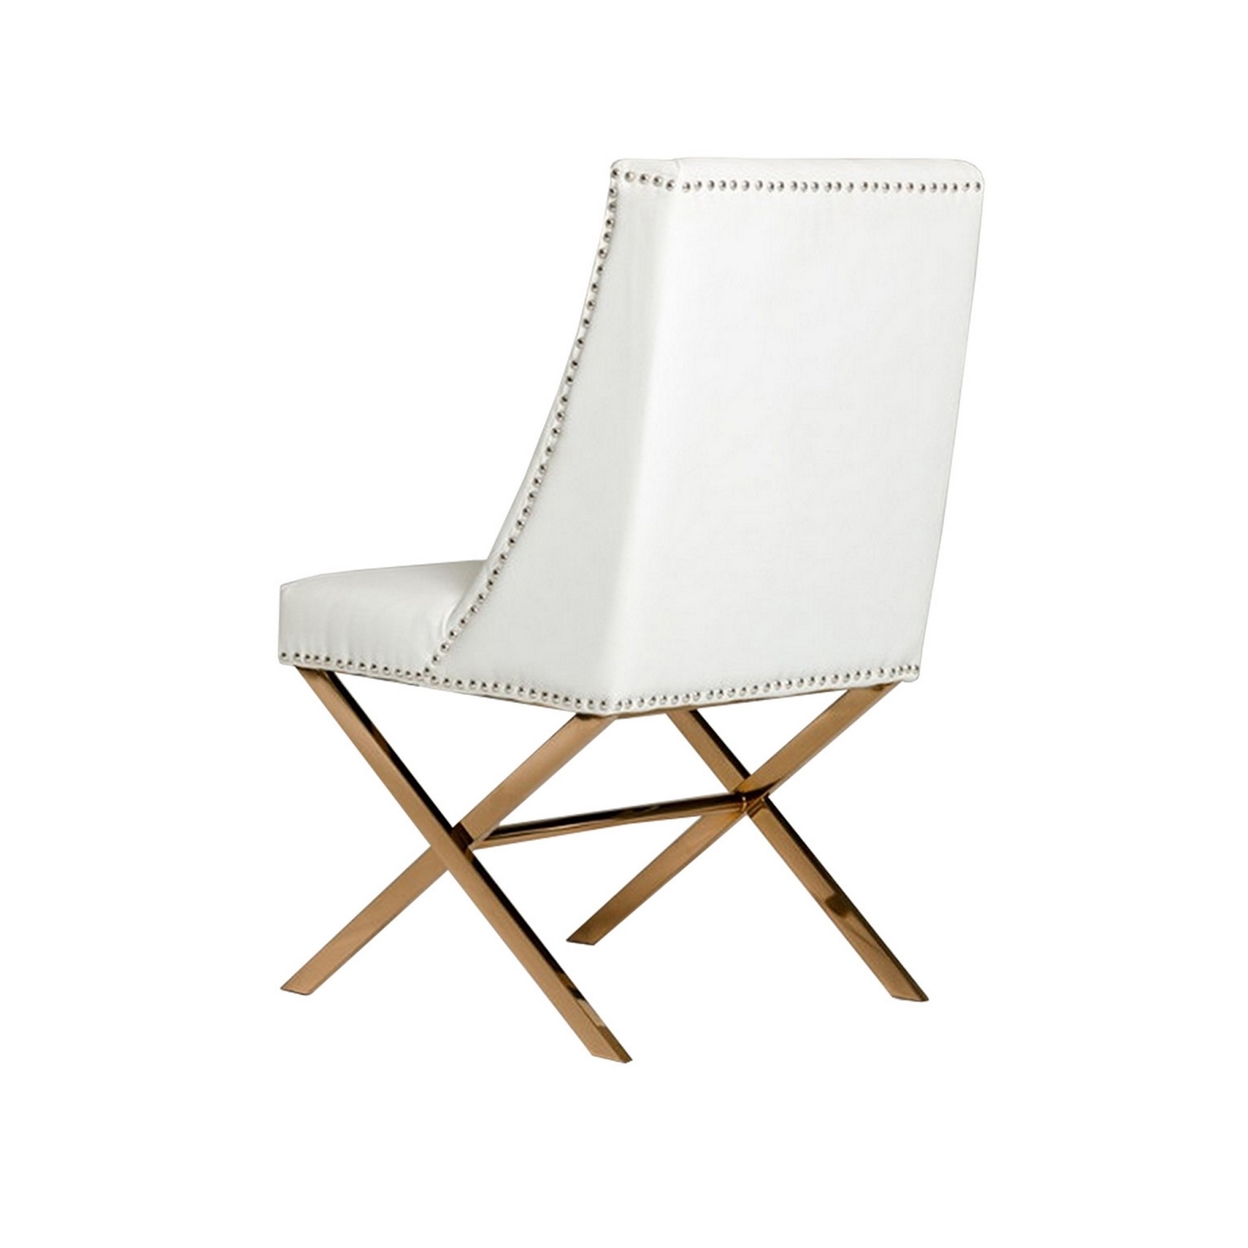 Leatherette Wingback Design Dining Chair With Trestle Steel Base, White And Gold- Saltoro Sherpi